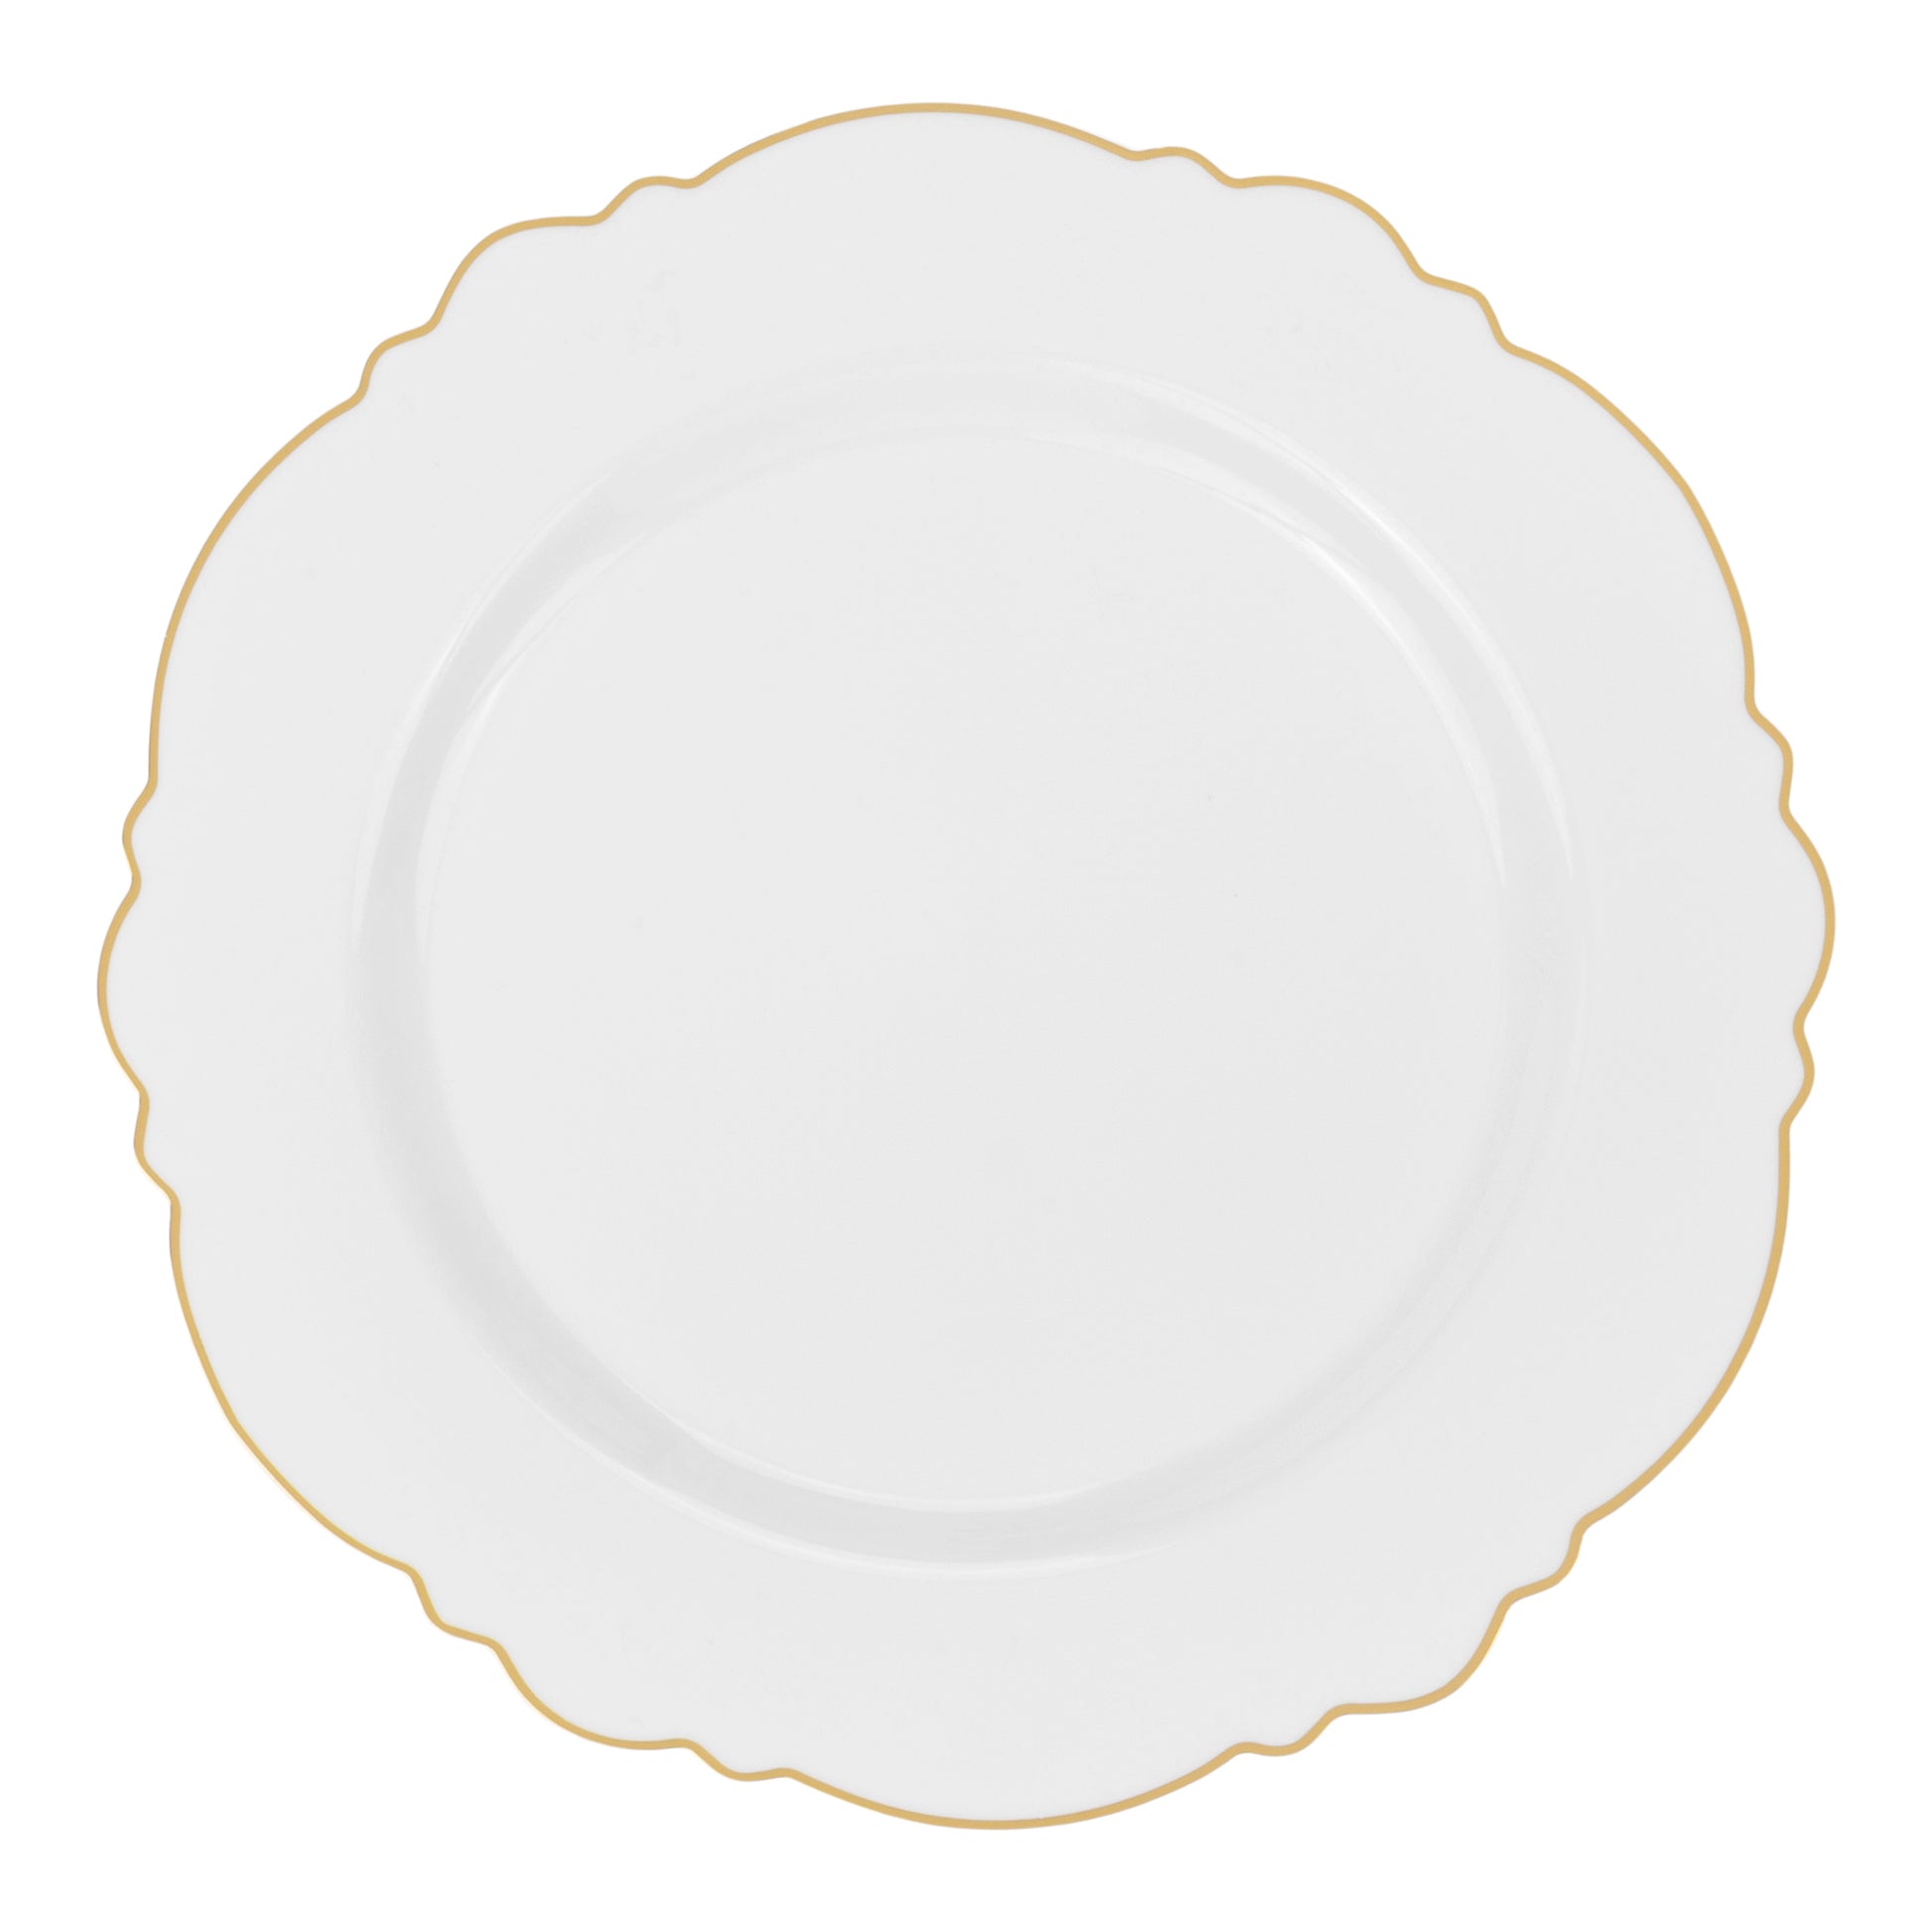 Scallop Disposable Plastic Plates 40 pcs Combo Pack - White Gold-Trimmed